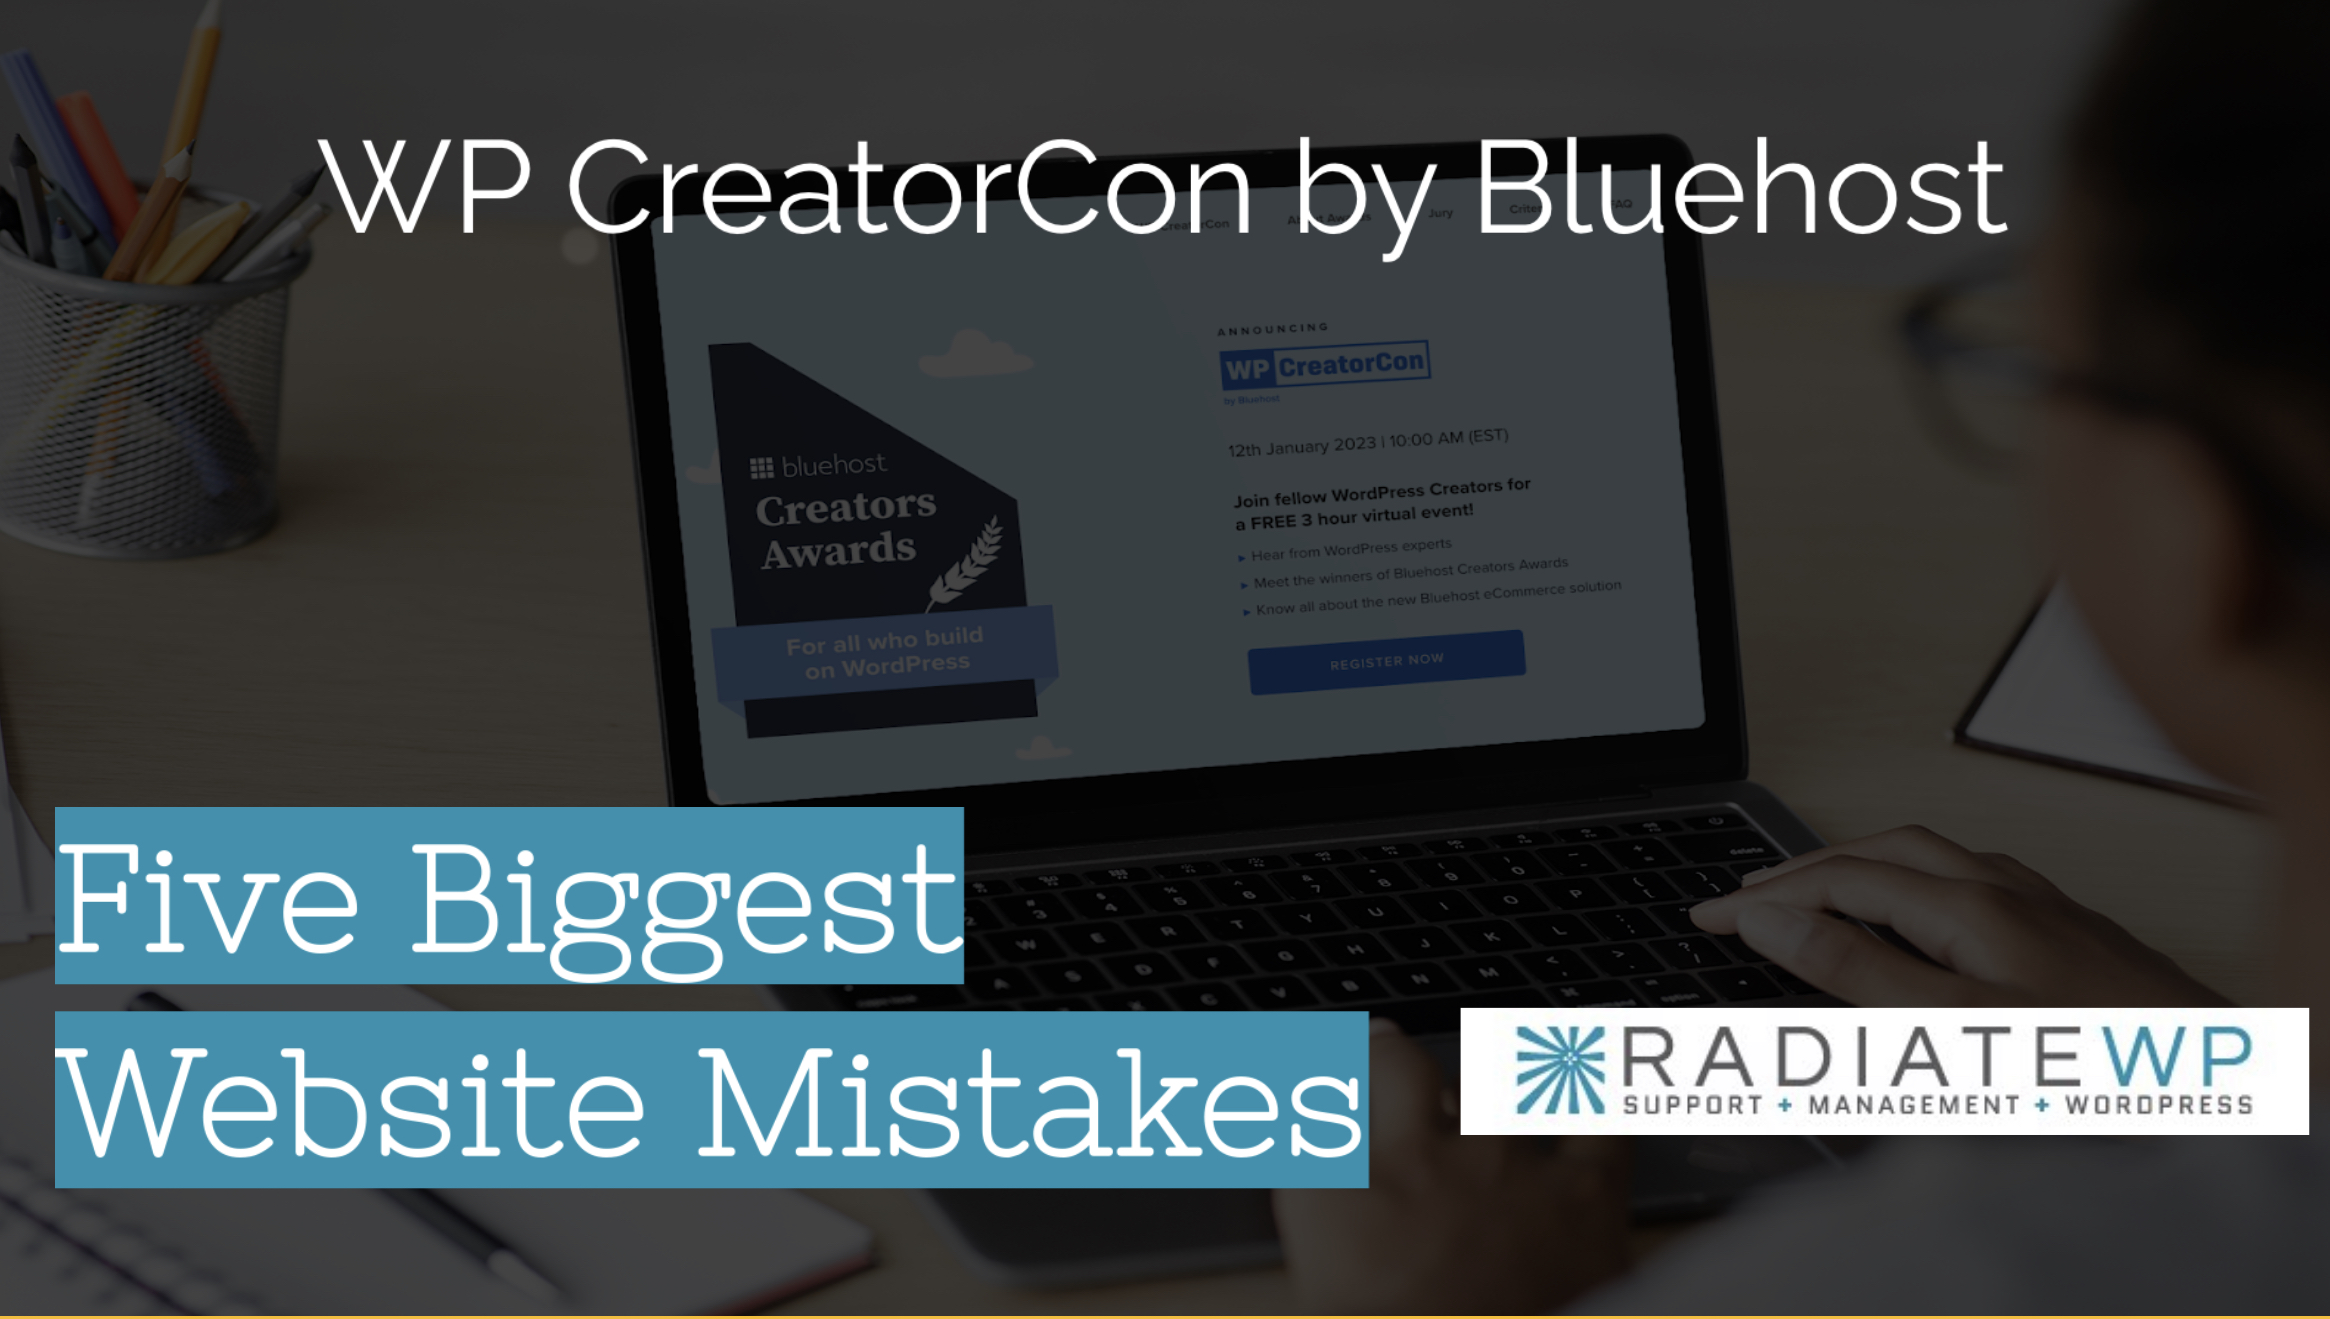 The title slide for the presentation, Five Biggest Website Mistakes.